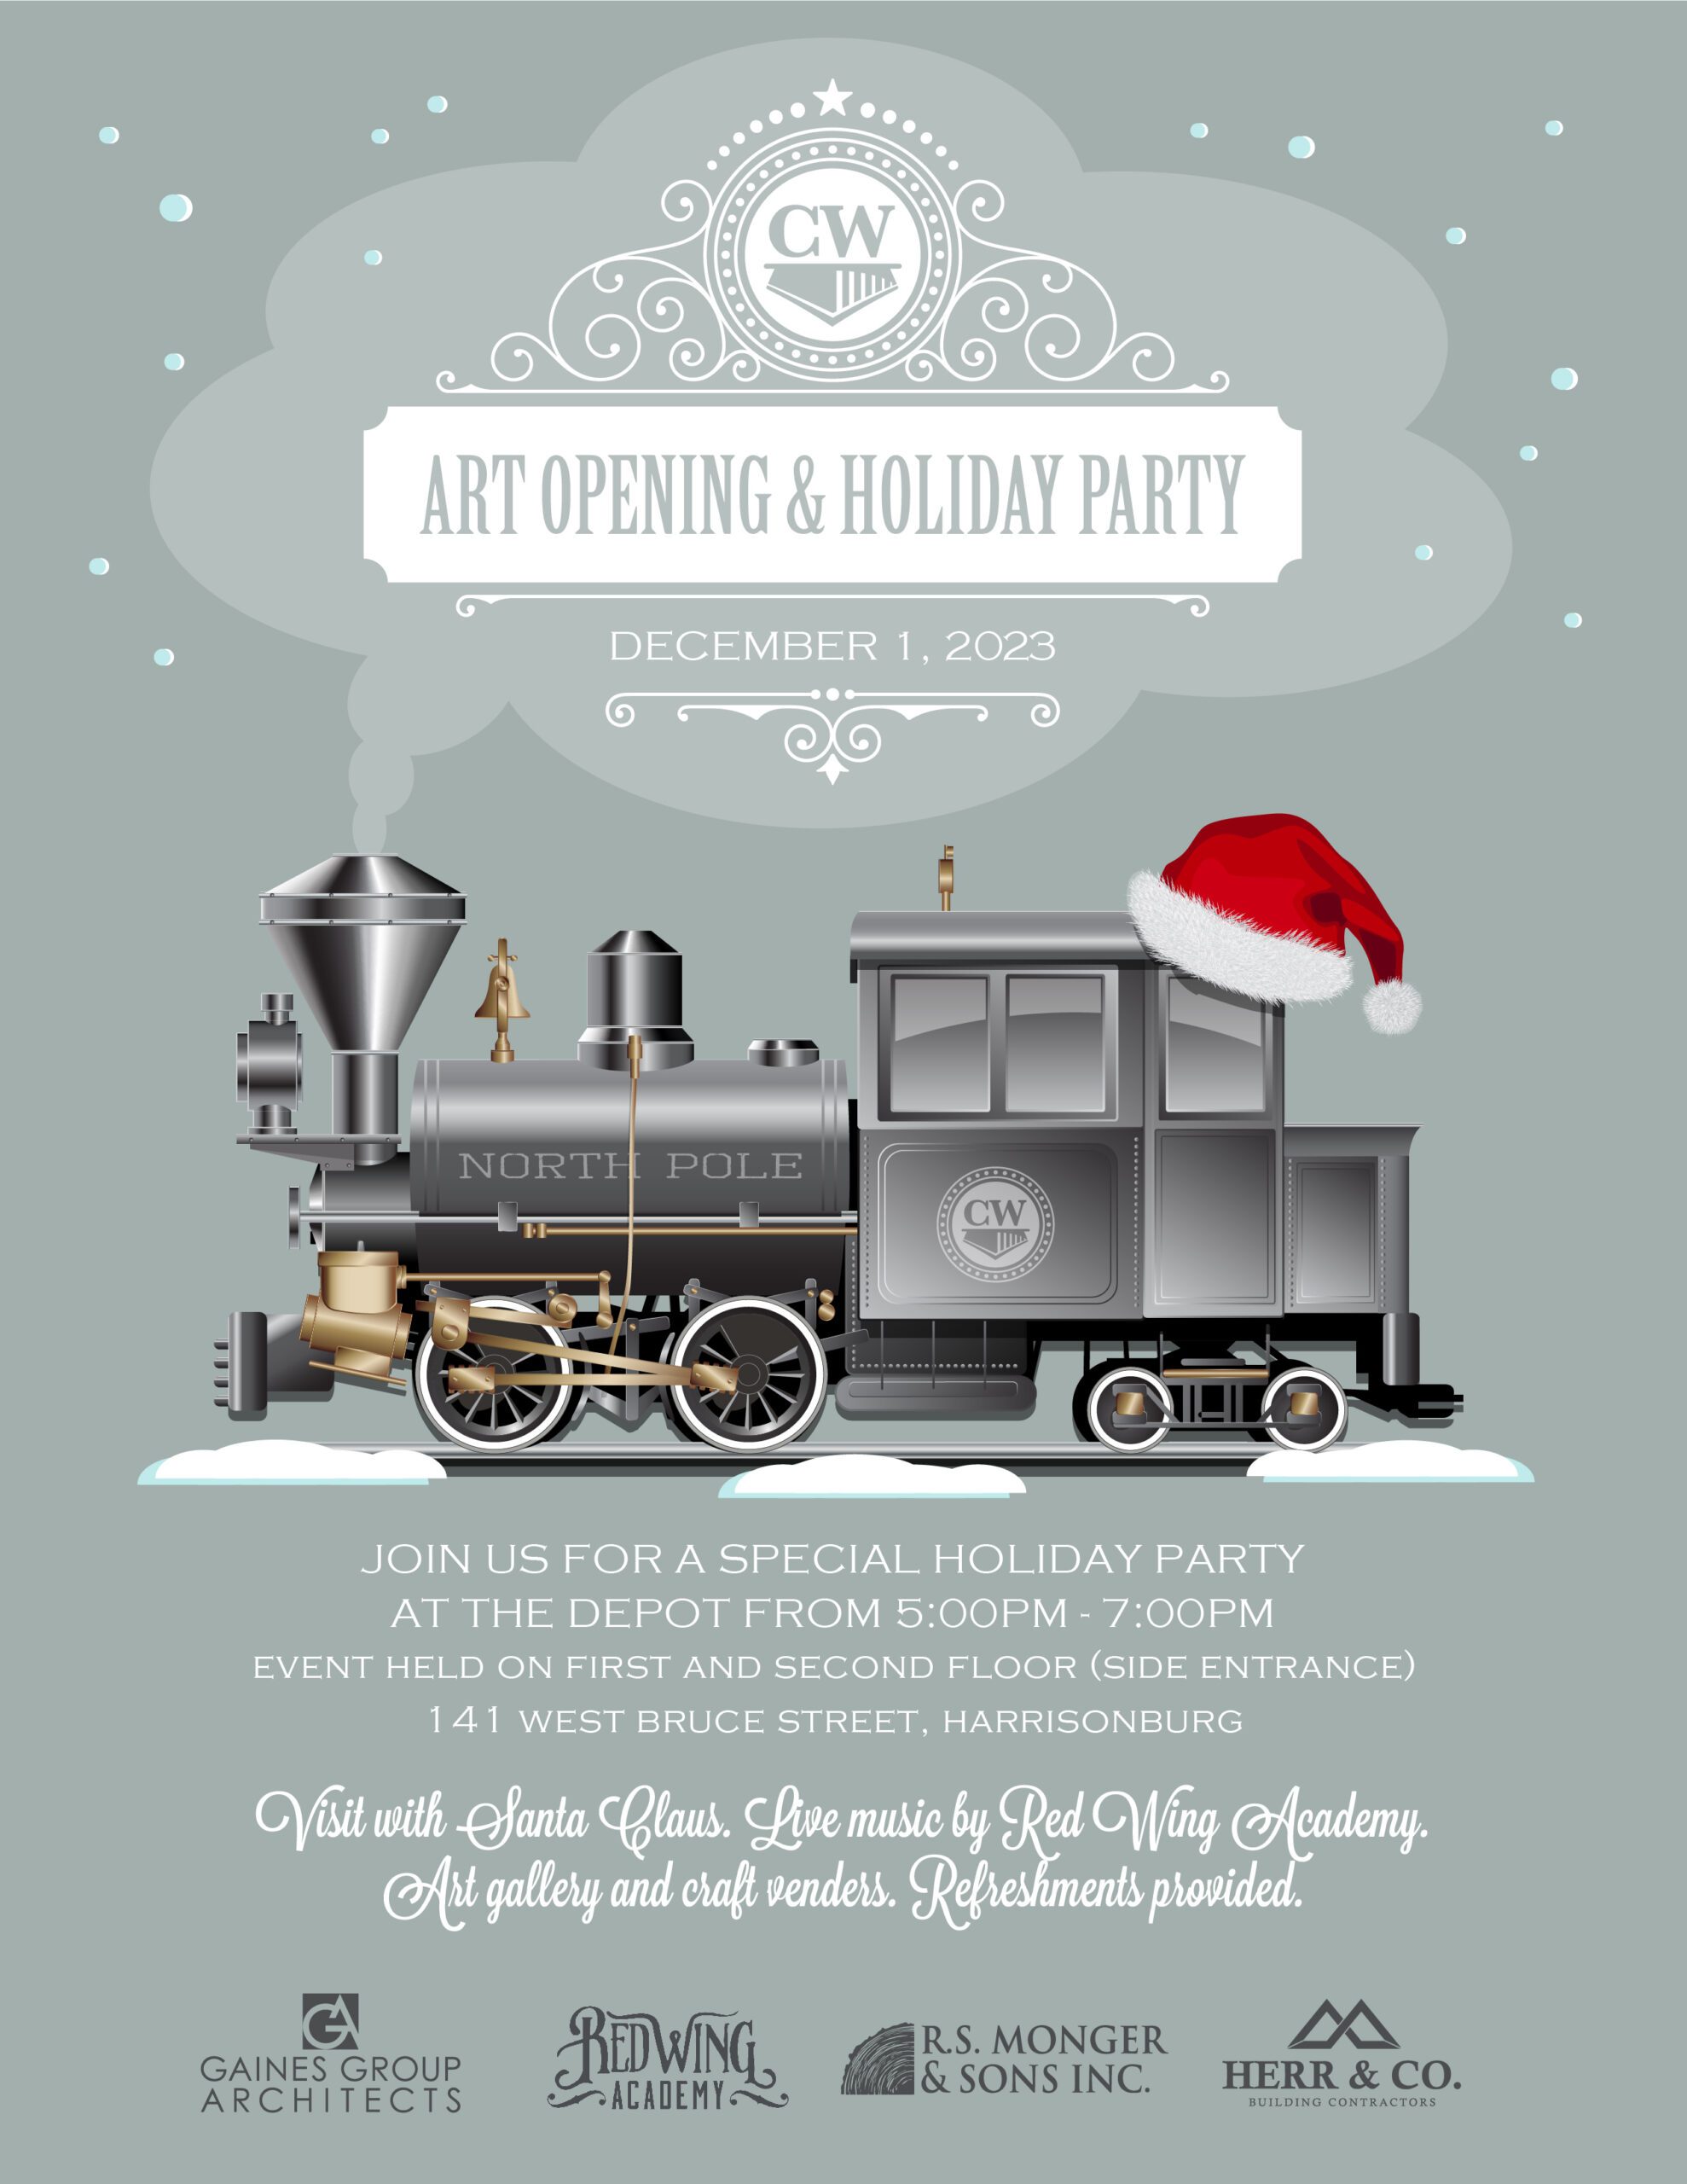 Invitation to Holiday Party and First Friday Event on December 1, 2023.